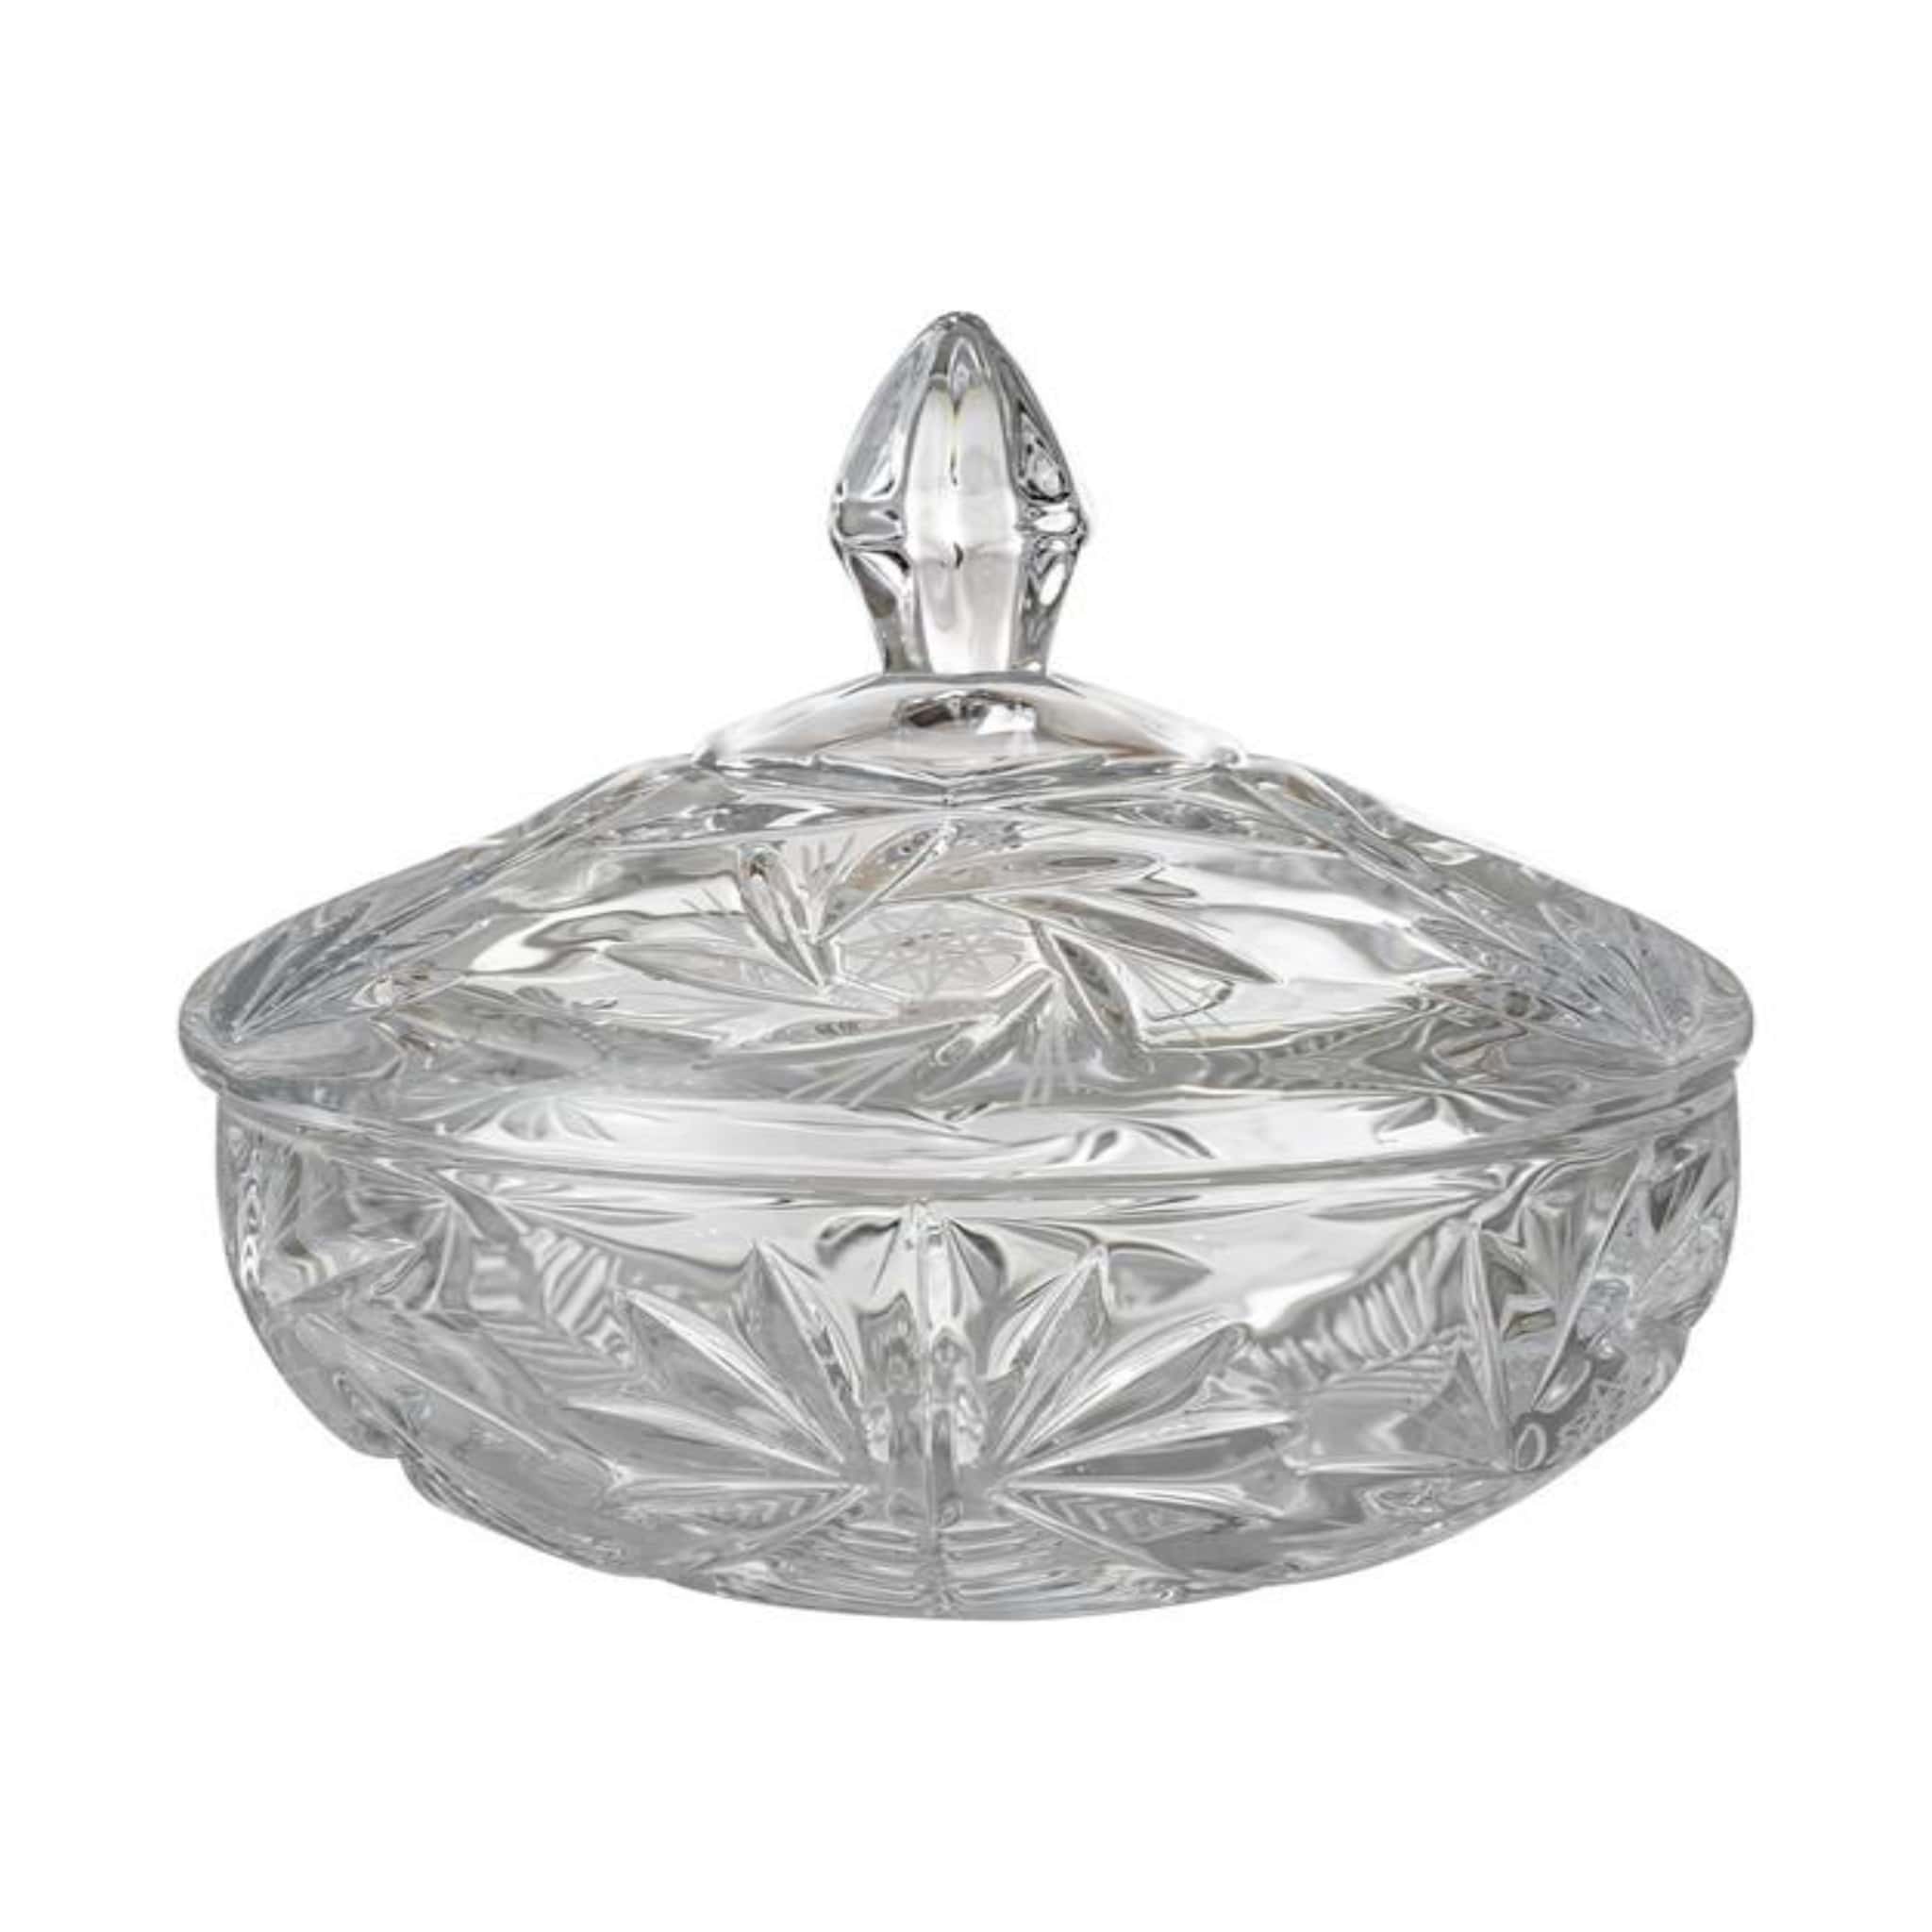 Bohemia Crystal - Round Crystal Box with Cover - 2700010336